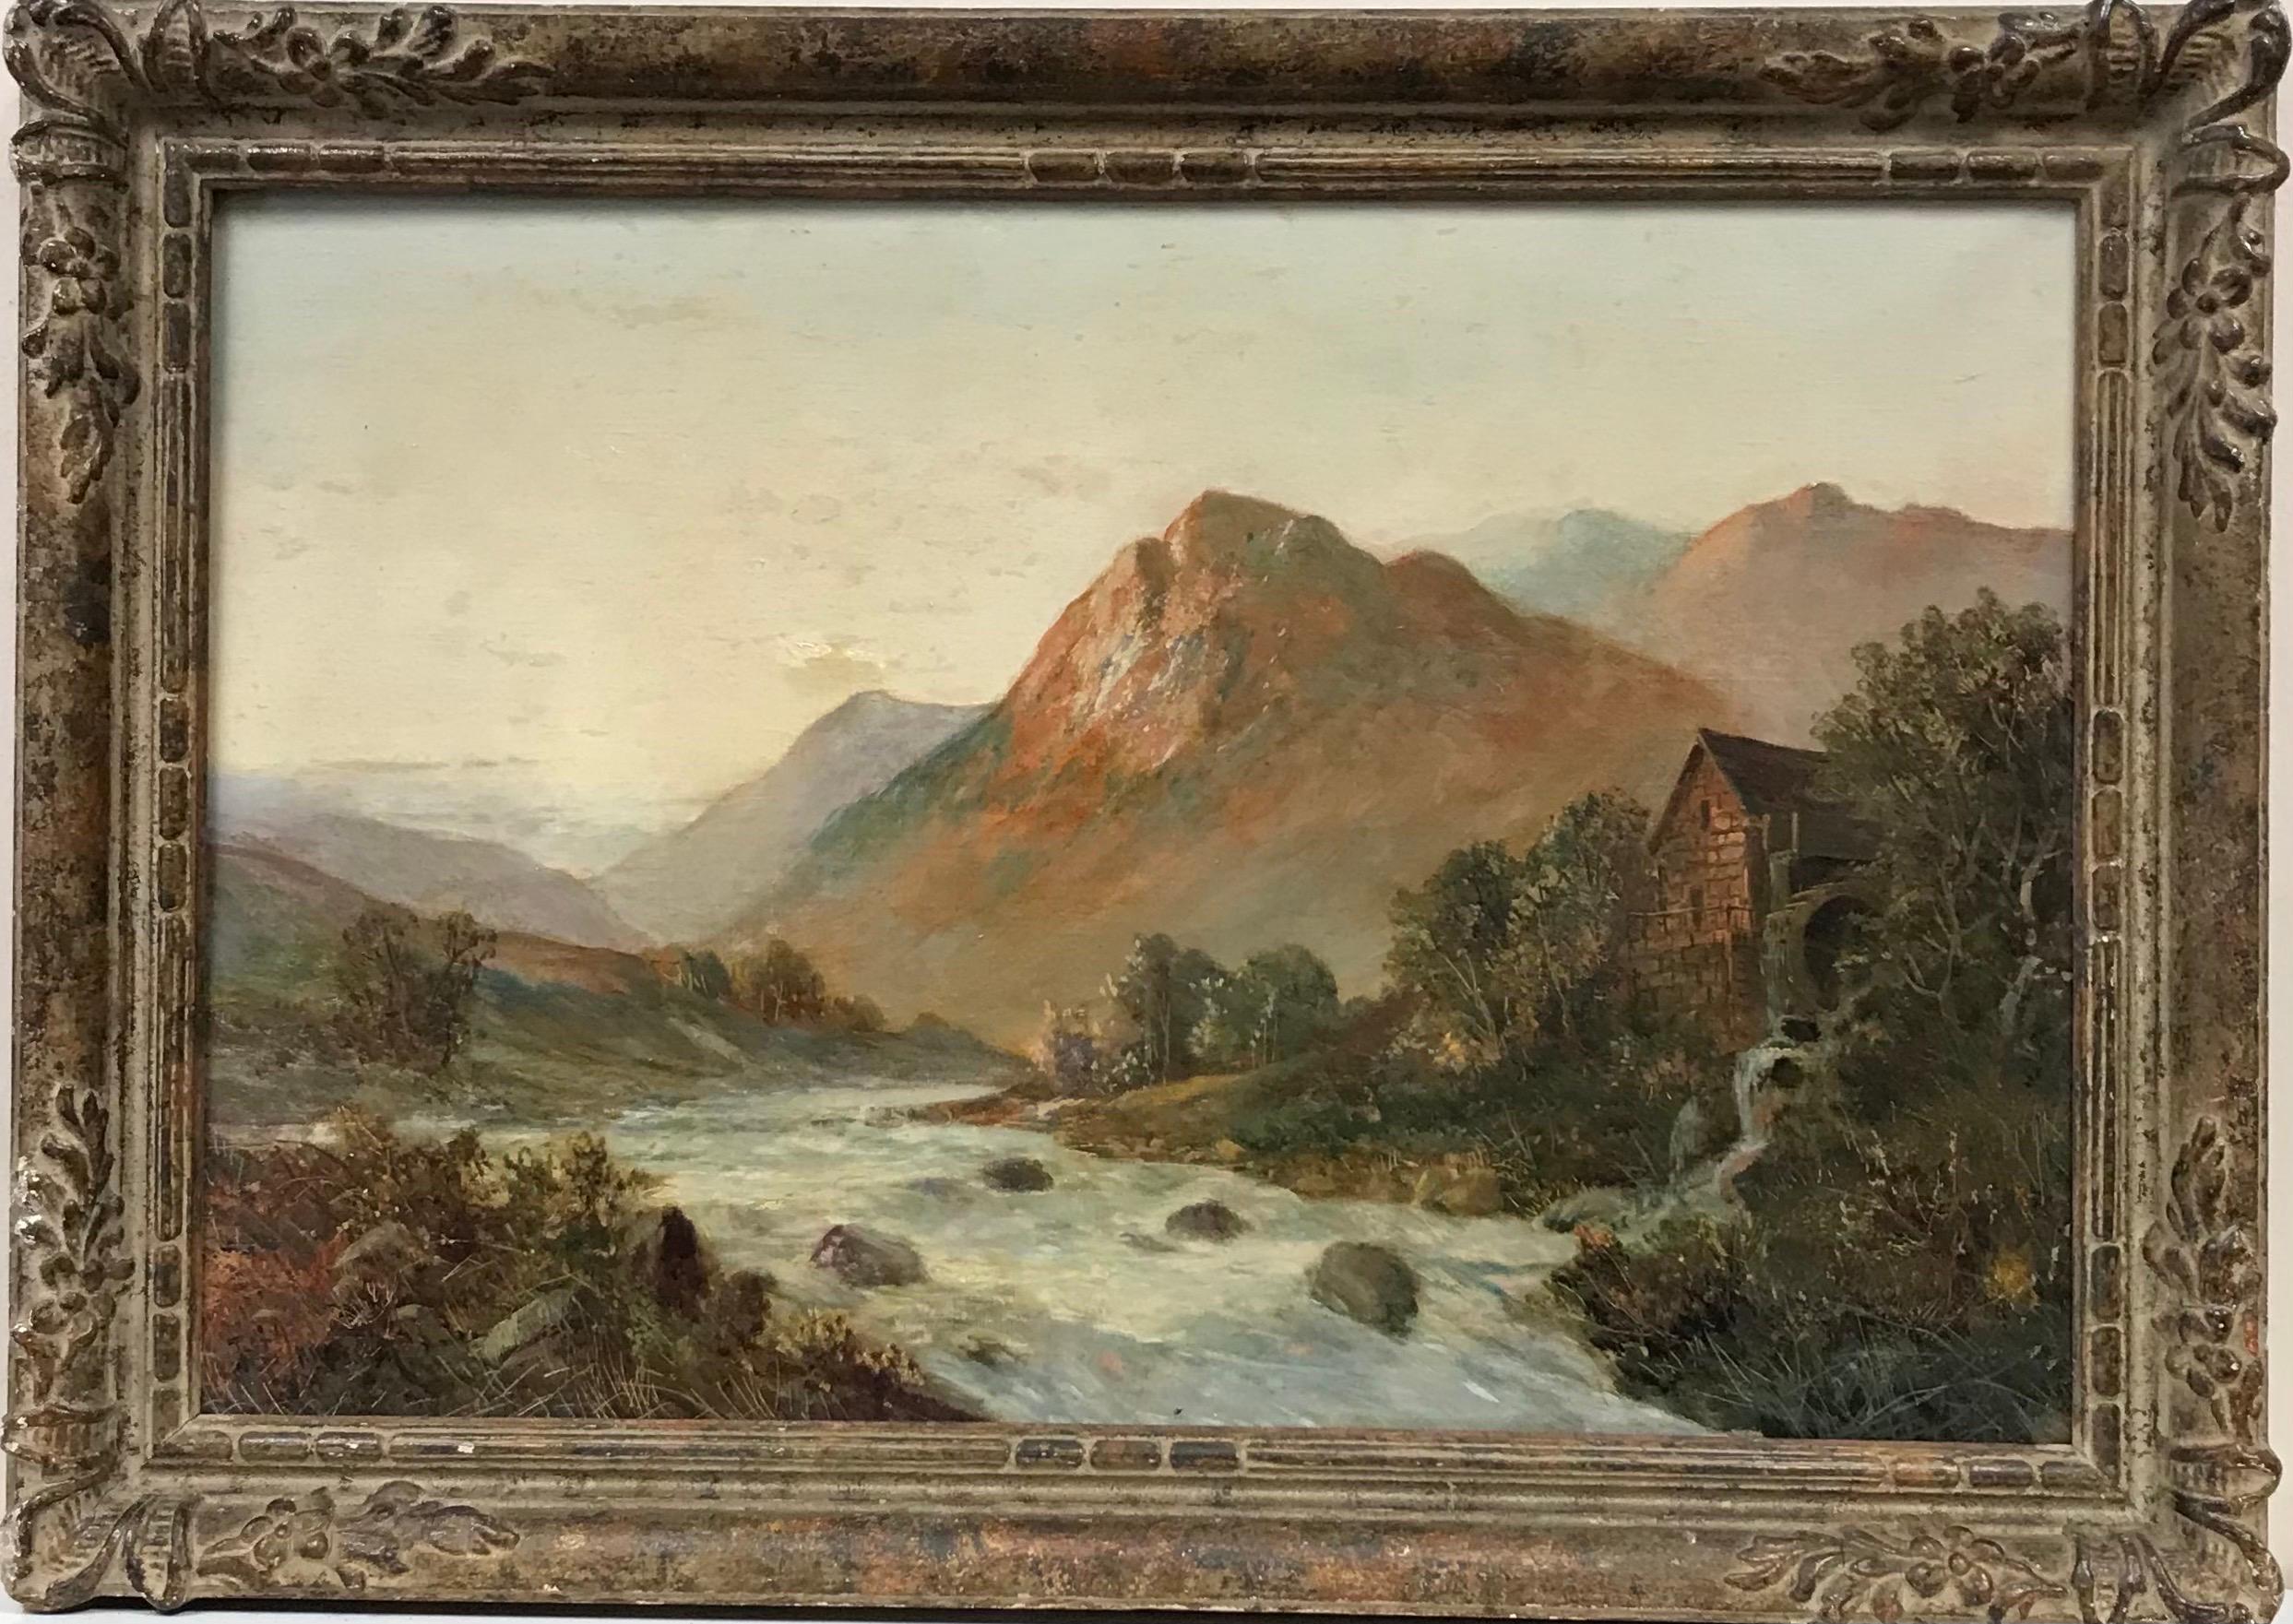 Antique Scottish Oil Painting - Highland River Landscape at Sunset - Brown Landscape Painting by Francis E. Jamieson